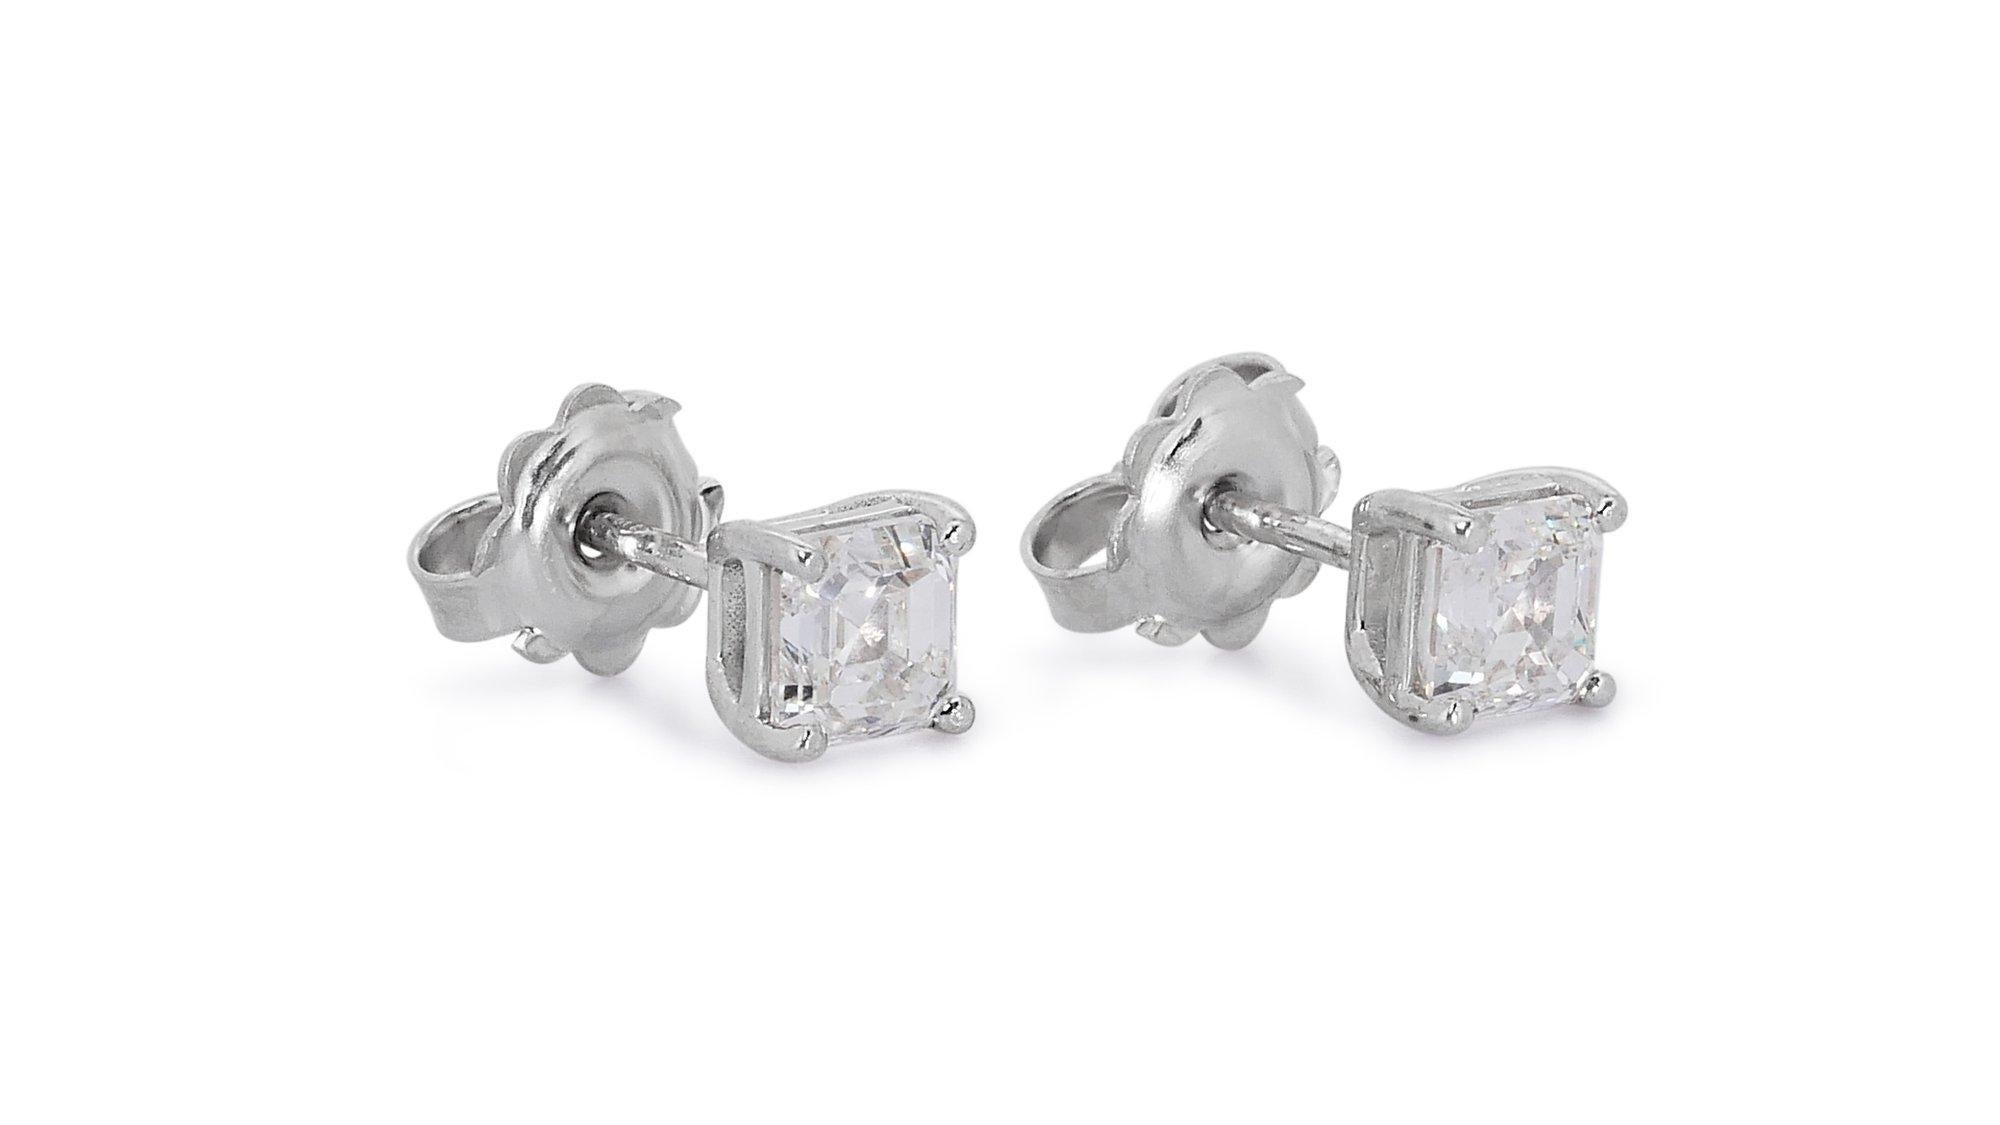 
Stunning 18K White Gold Natural Diamonds Stud Earrings w/1.12 Carat - GIA Certified

Presenting these stunning diamond stud earrings that showcase a total of 1.12 carats of sparkling square diamonds. Crafted in luxurious 18K white gold, these stud